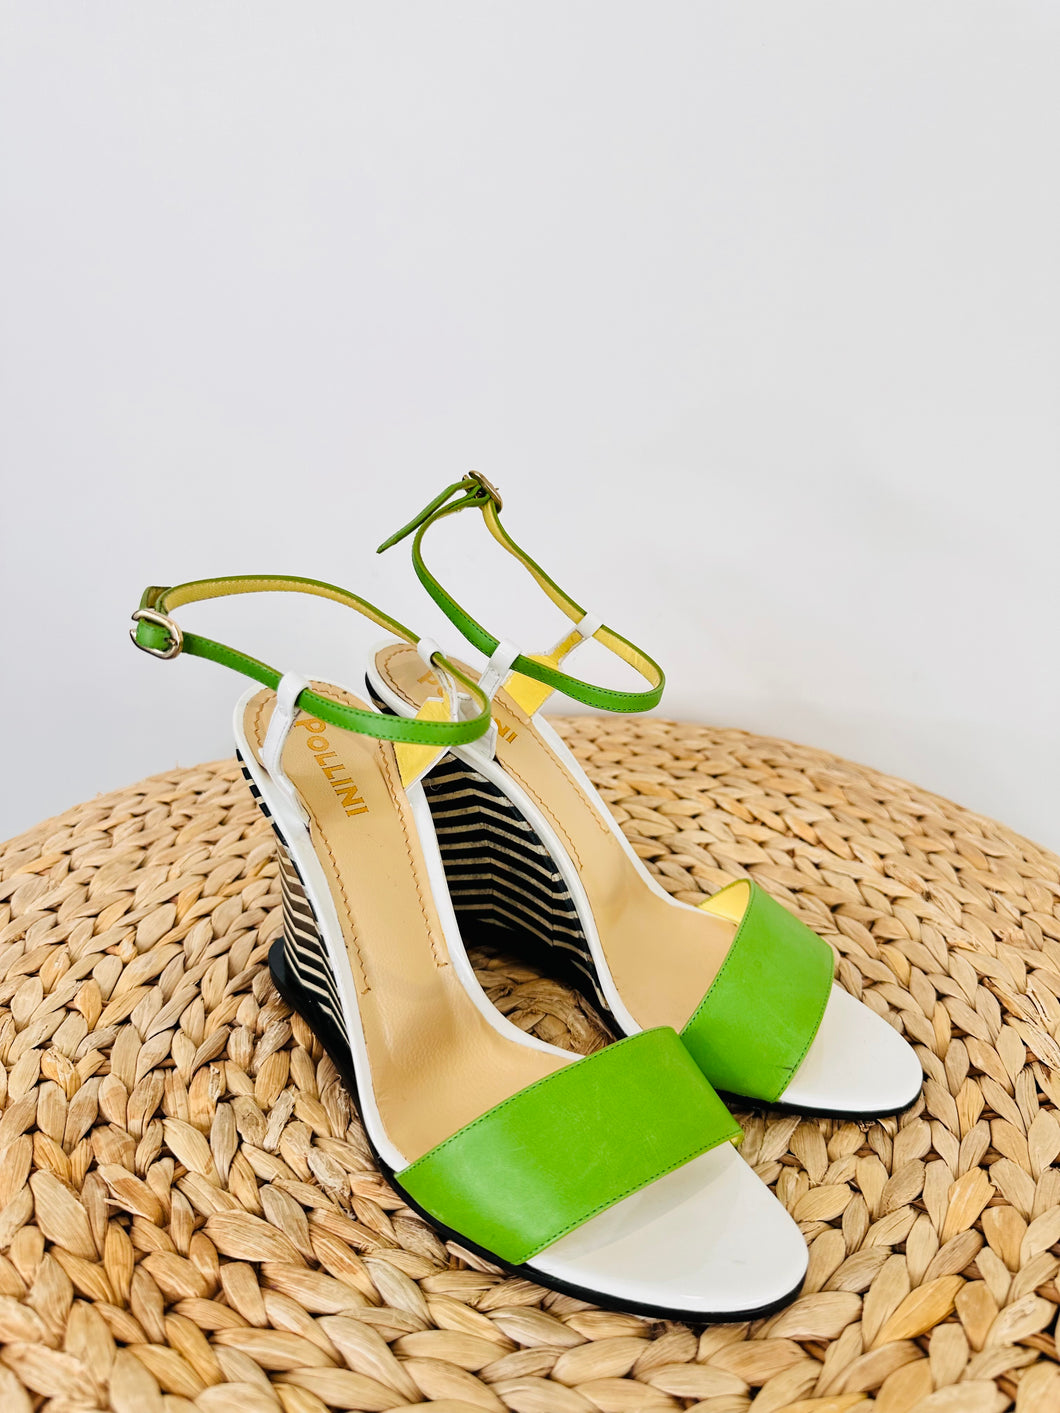 Wedge Sandals - Size 39